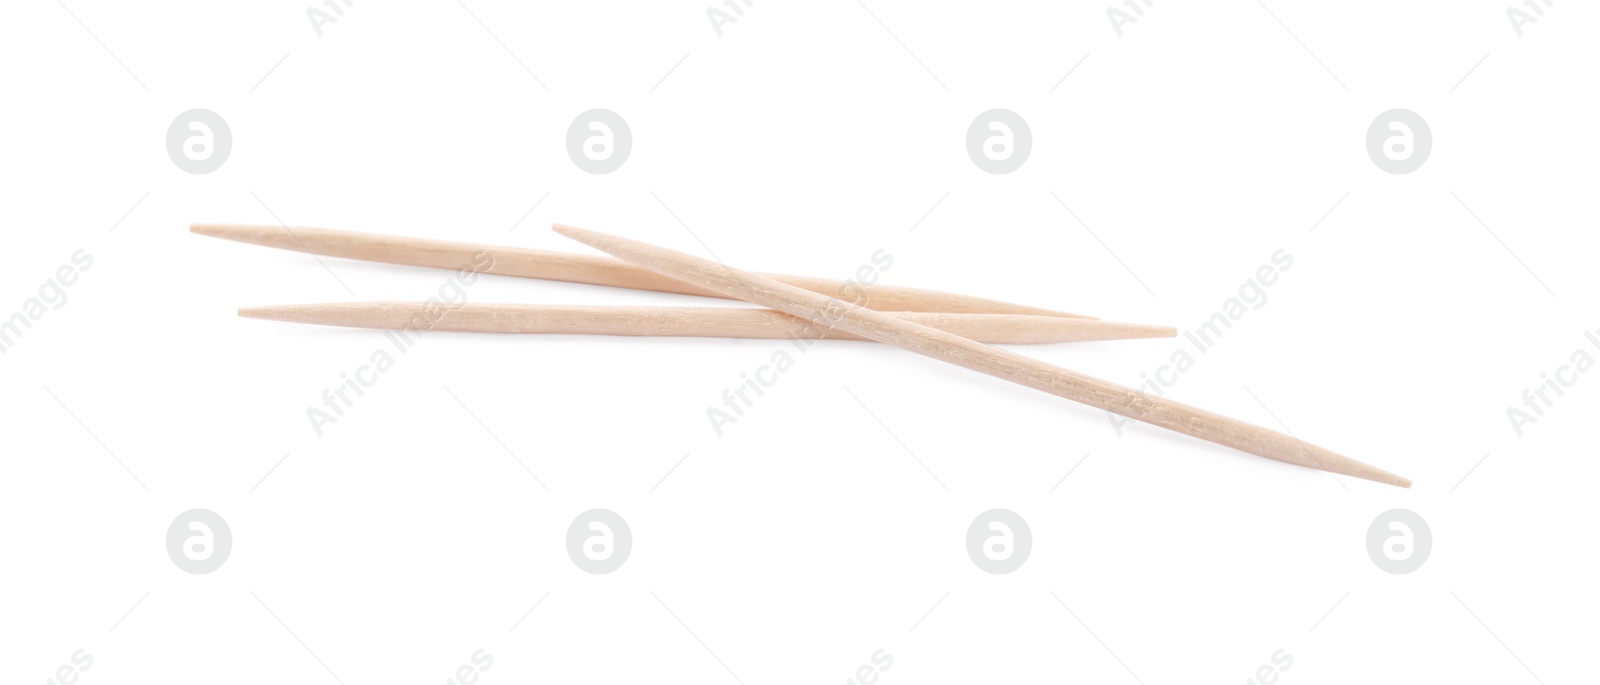 Photo of Three disposable wooden toothpicks on white background